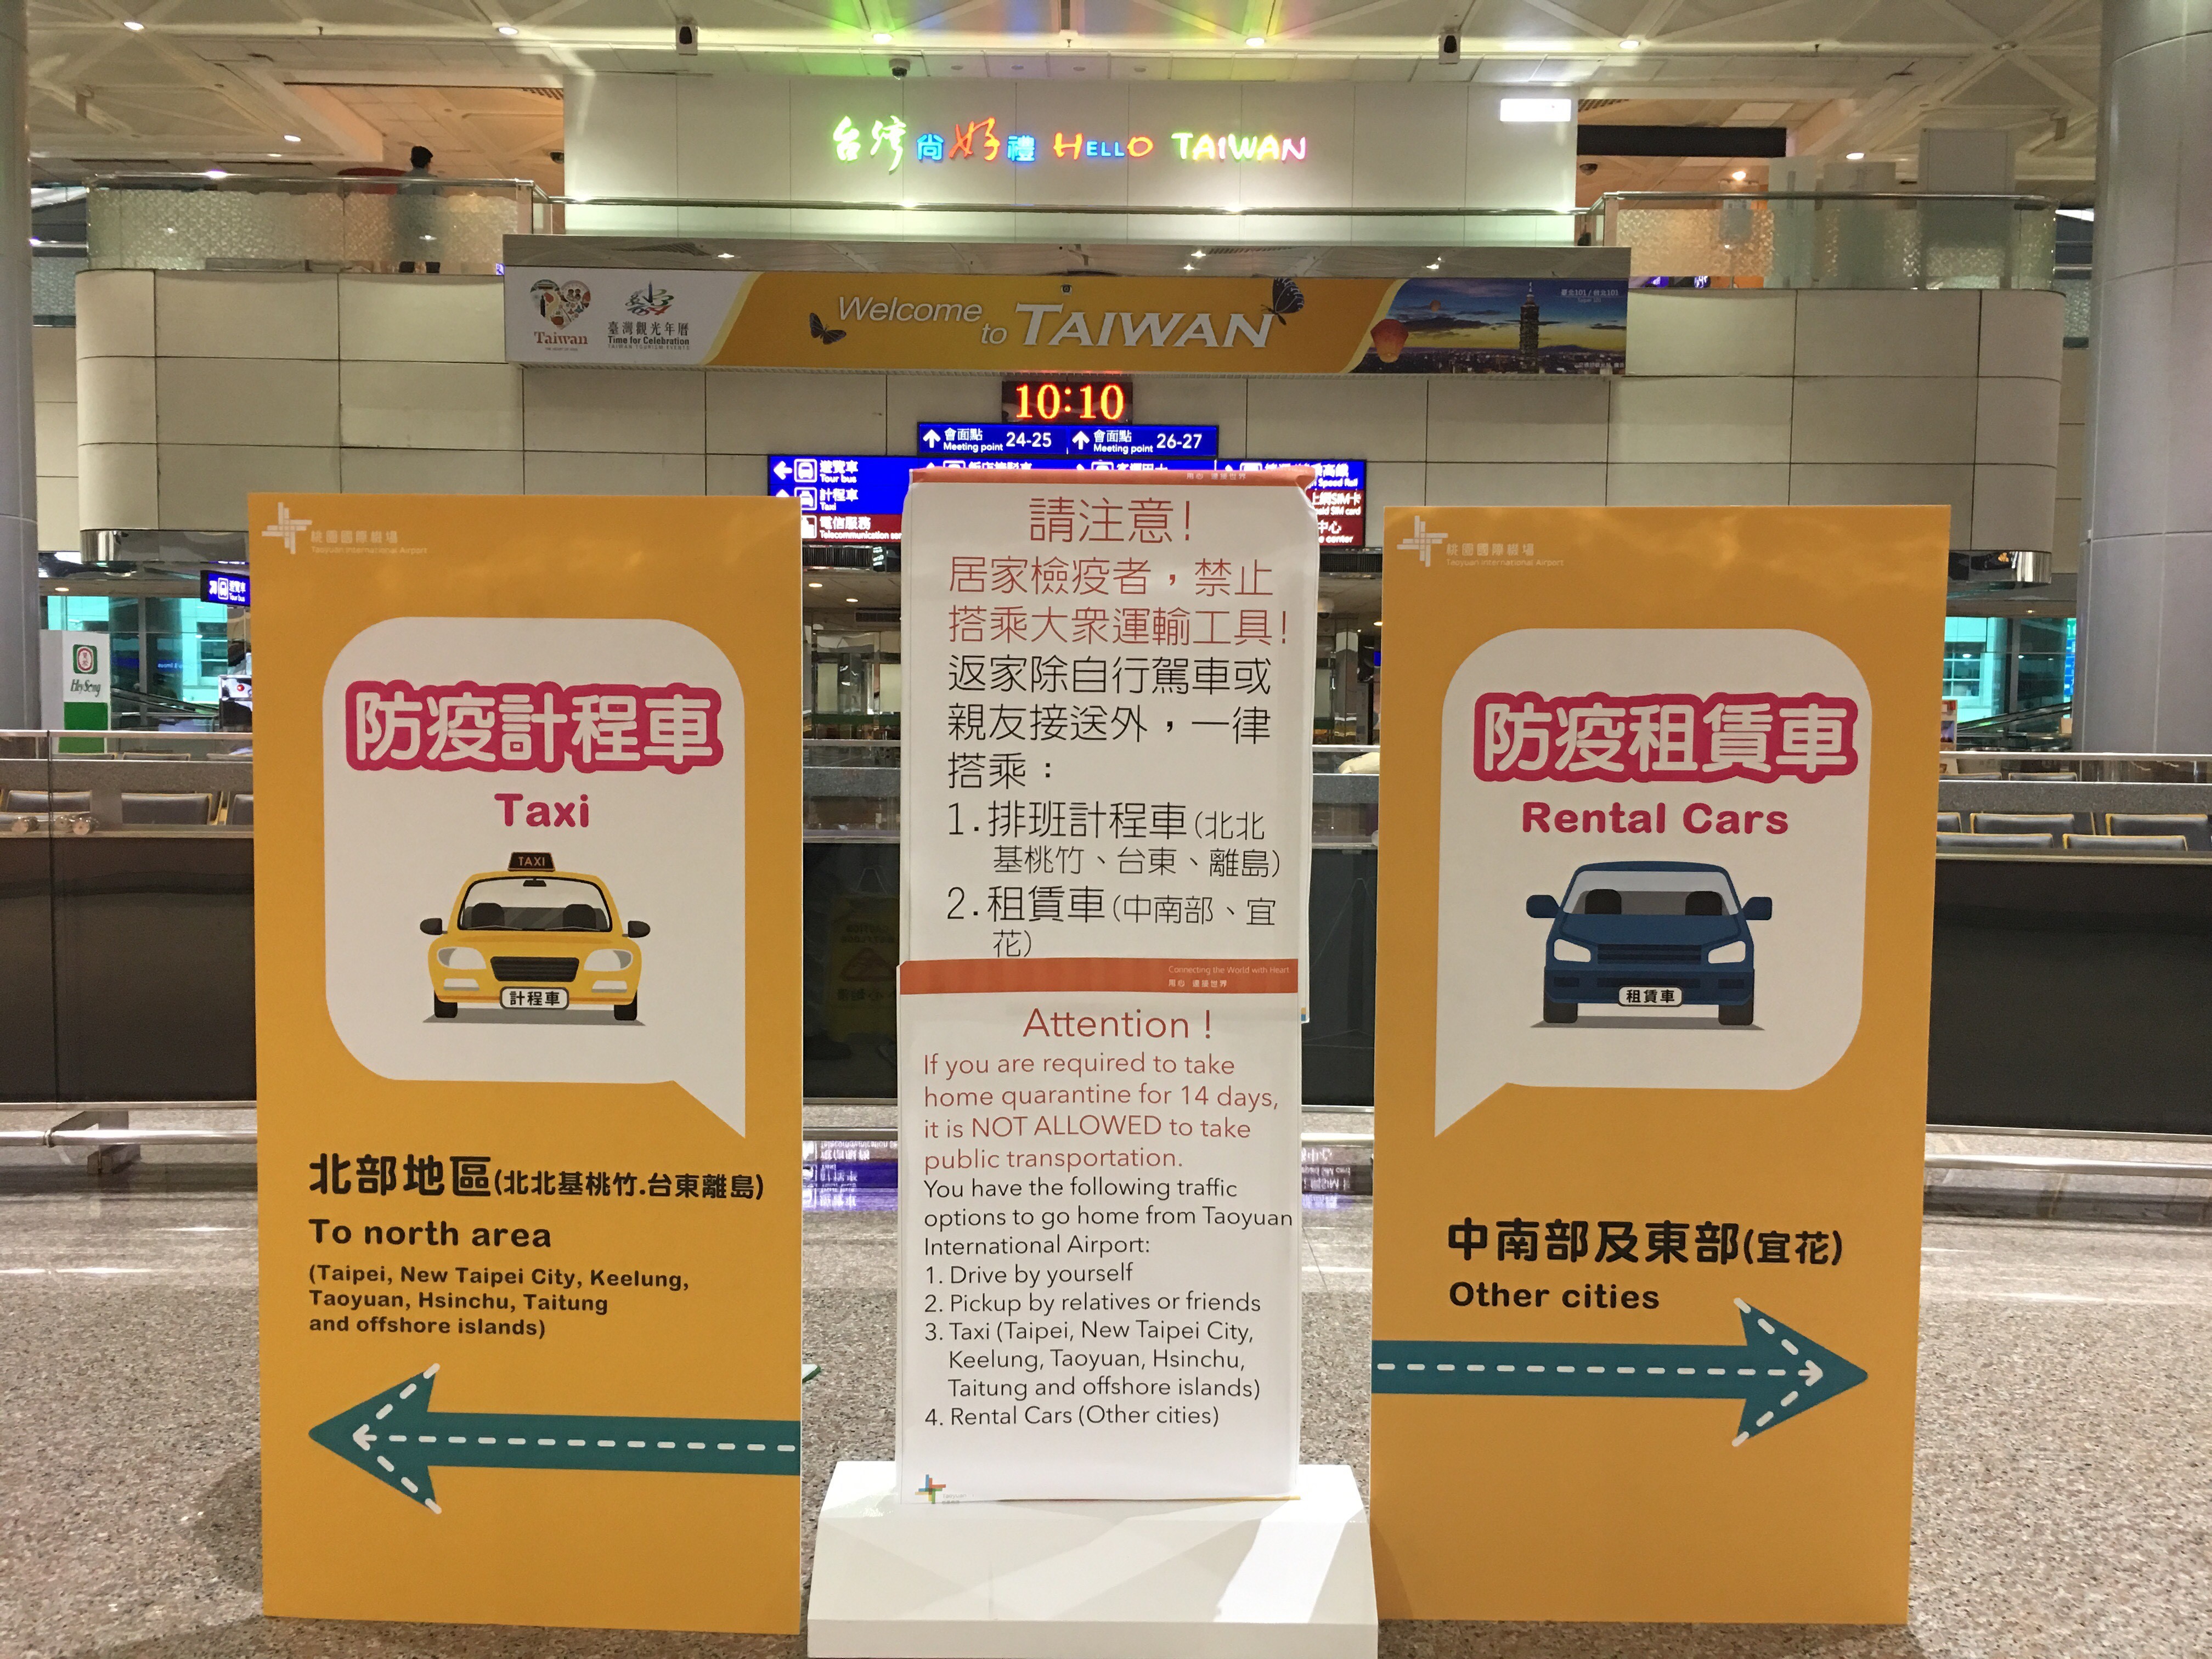 Inbound passengers from "high-risk" countries must board the anti-epidemic taxi. (Photo / Provided by Taoyuan Airport)